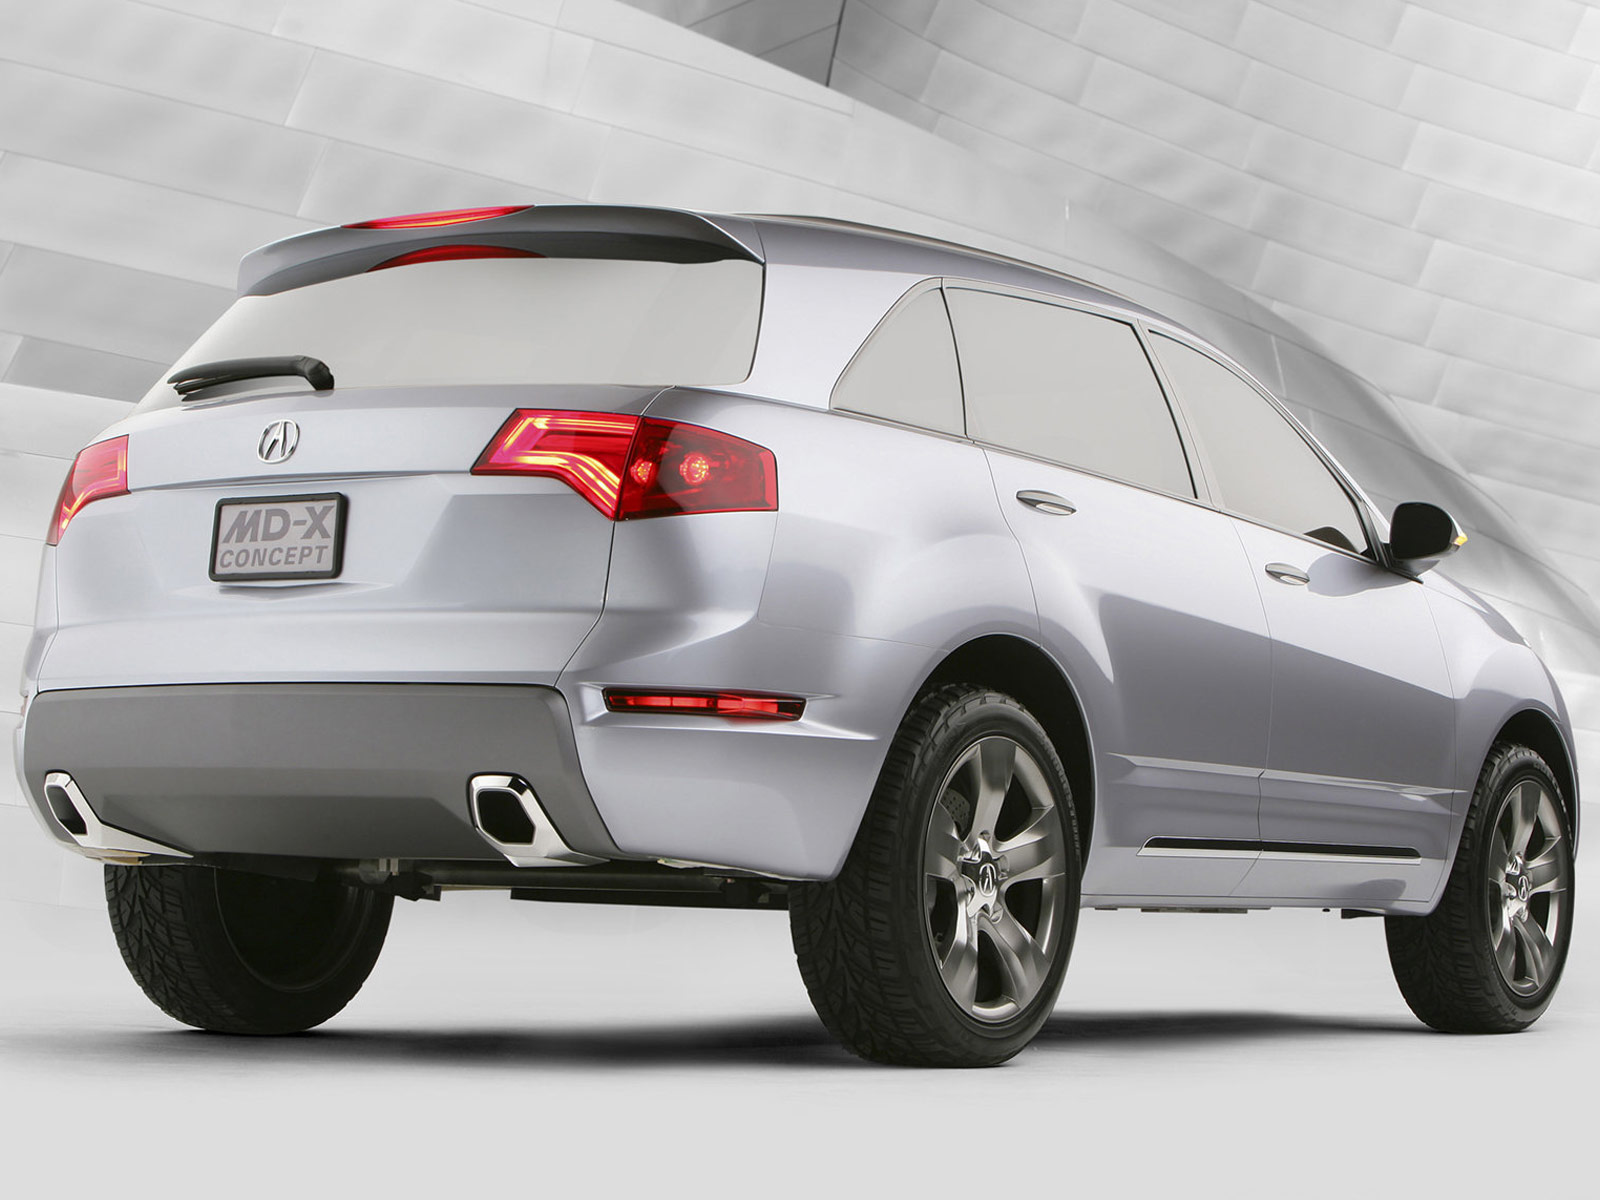 2006 ACURA MDX Concept Car Insurance Information